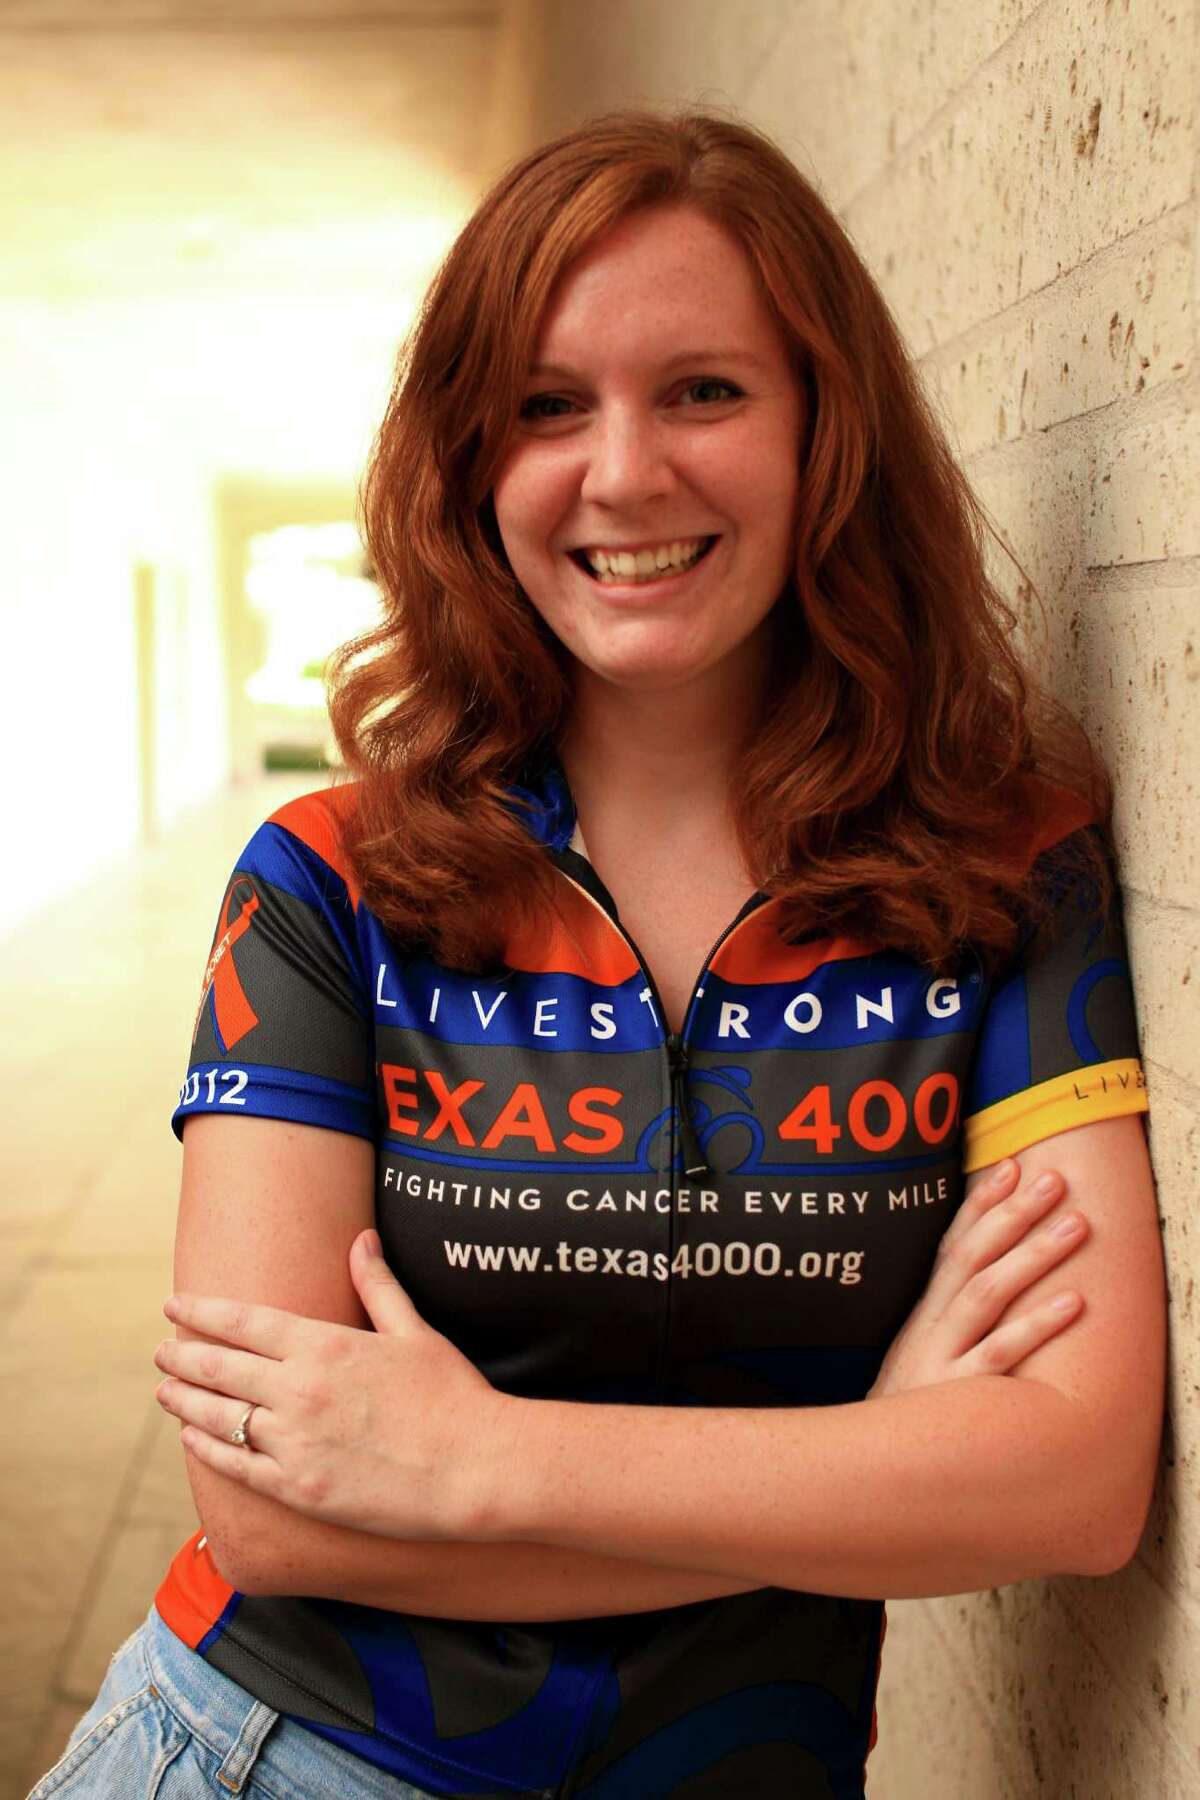 Hillary Hazel is riding to Alaska to raise money for cancer research.